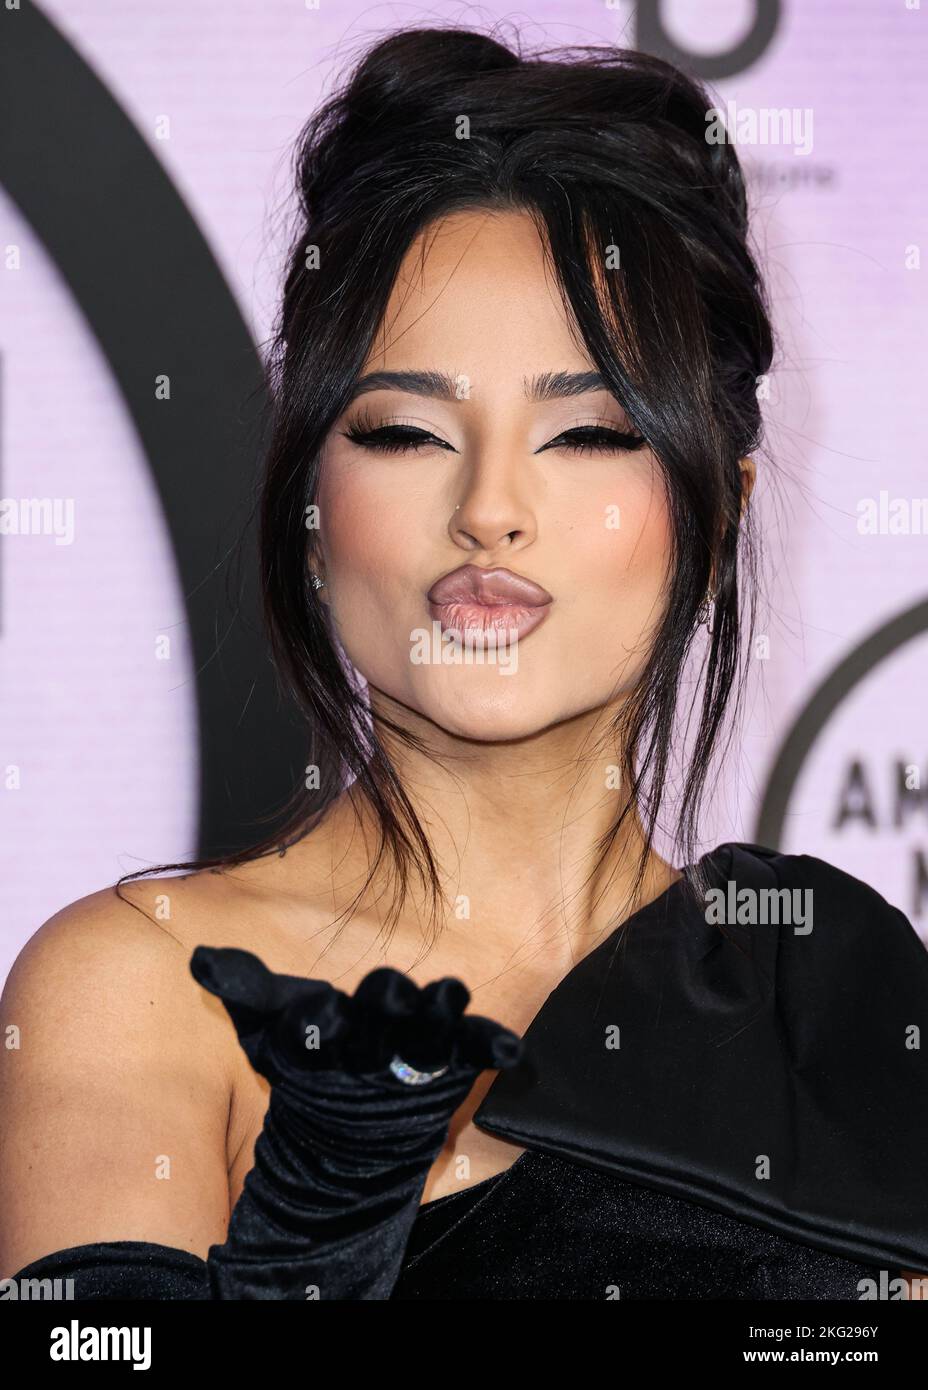 LOS ANGELES, CALIFORNIA, USA - NOVEMBER 20: Becky G (Rebbeca Marie Gomez) arrives at the 2022 American Music Awards (50th Annual American Music Awards) held at Microsoft Theater at L.A. Live on November 20, 2022 in Los Angeles, California, United States. (Photo by Xavier Collin/Image Press Agency) Stock Photo